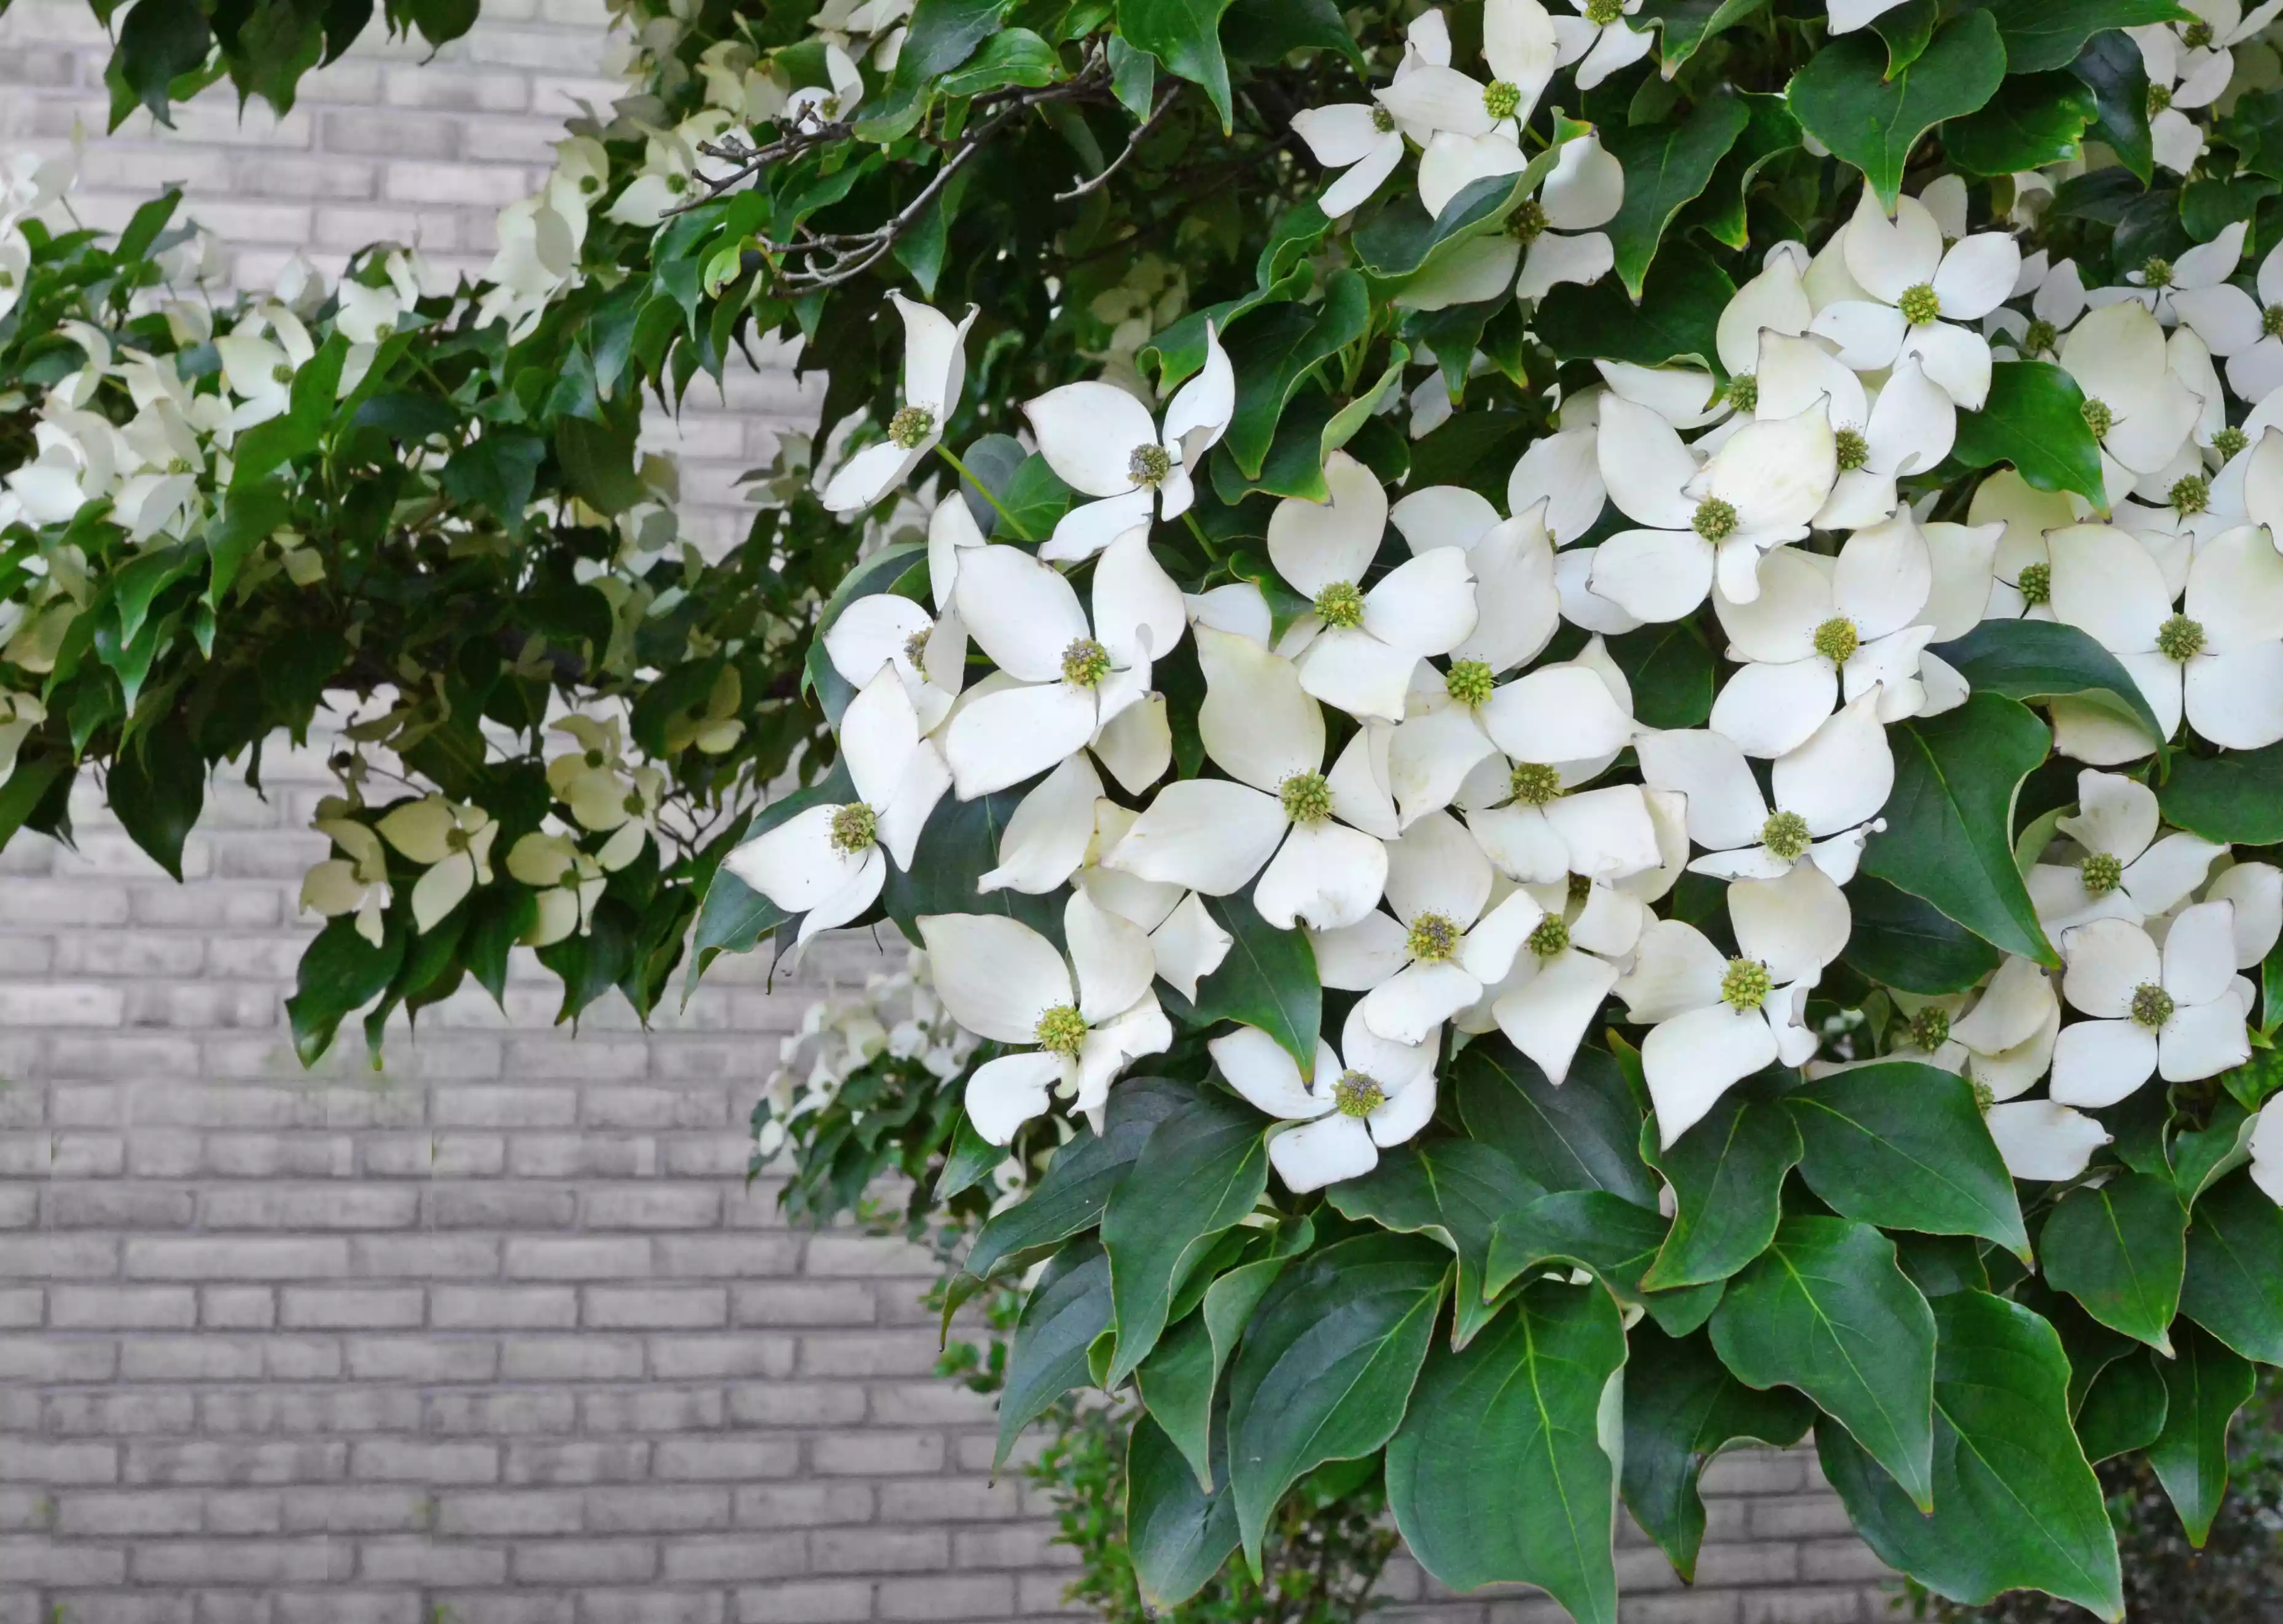 A close-up shot of a dogwood tree in bloom in front of a brick wall